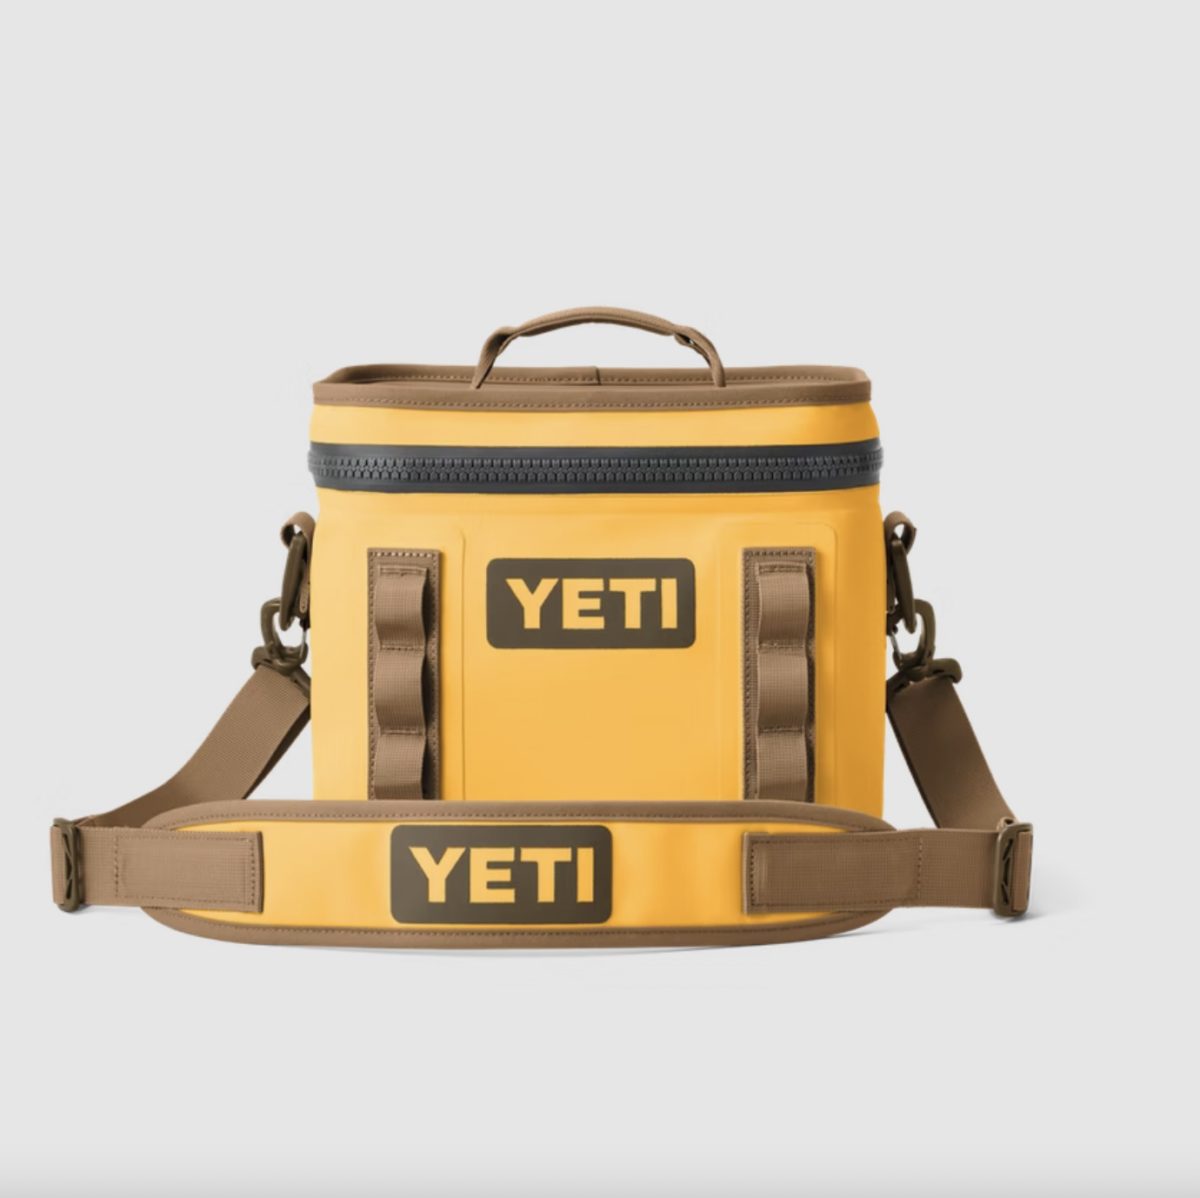 yeti lunch boxes